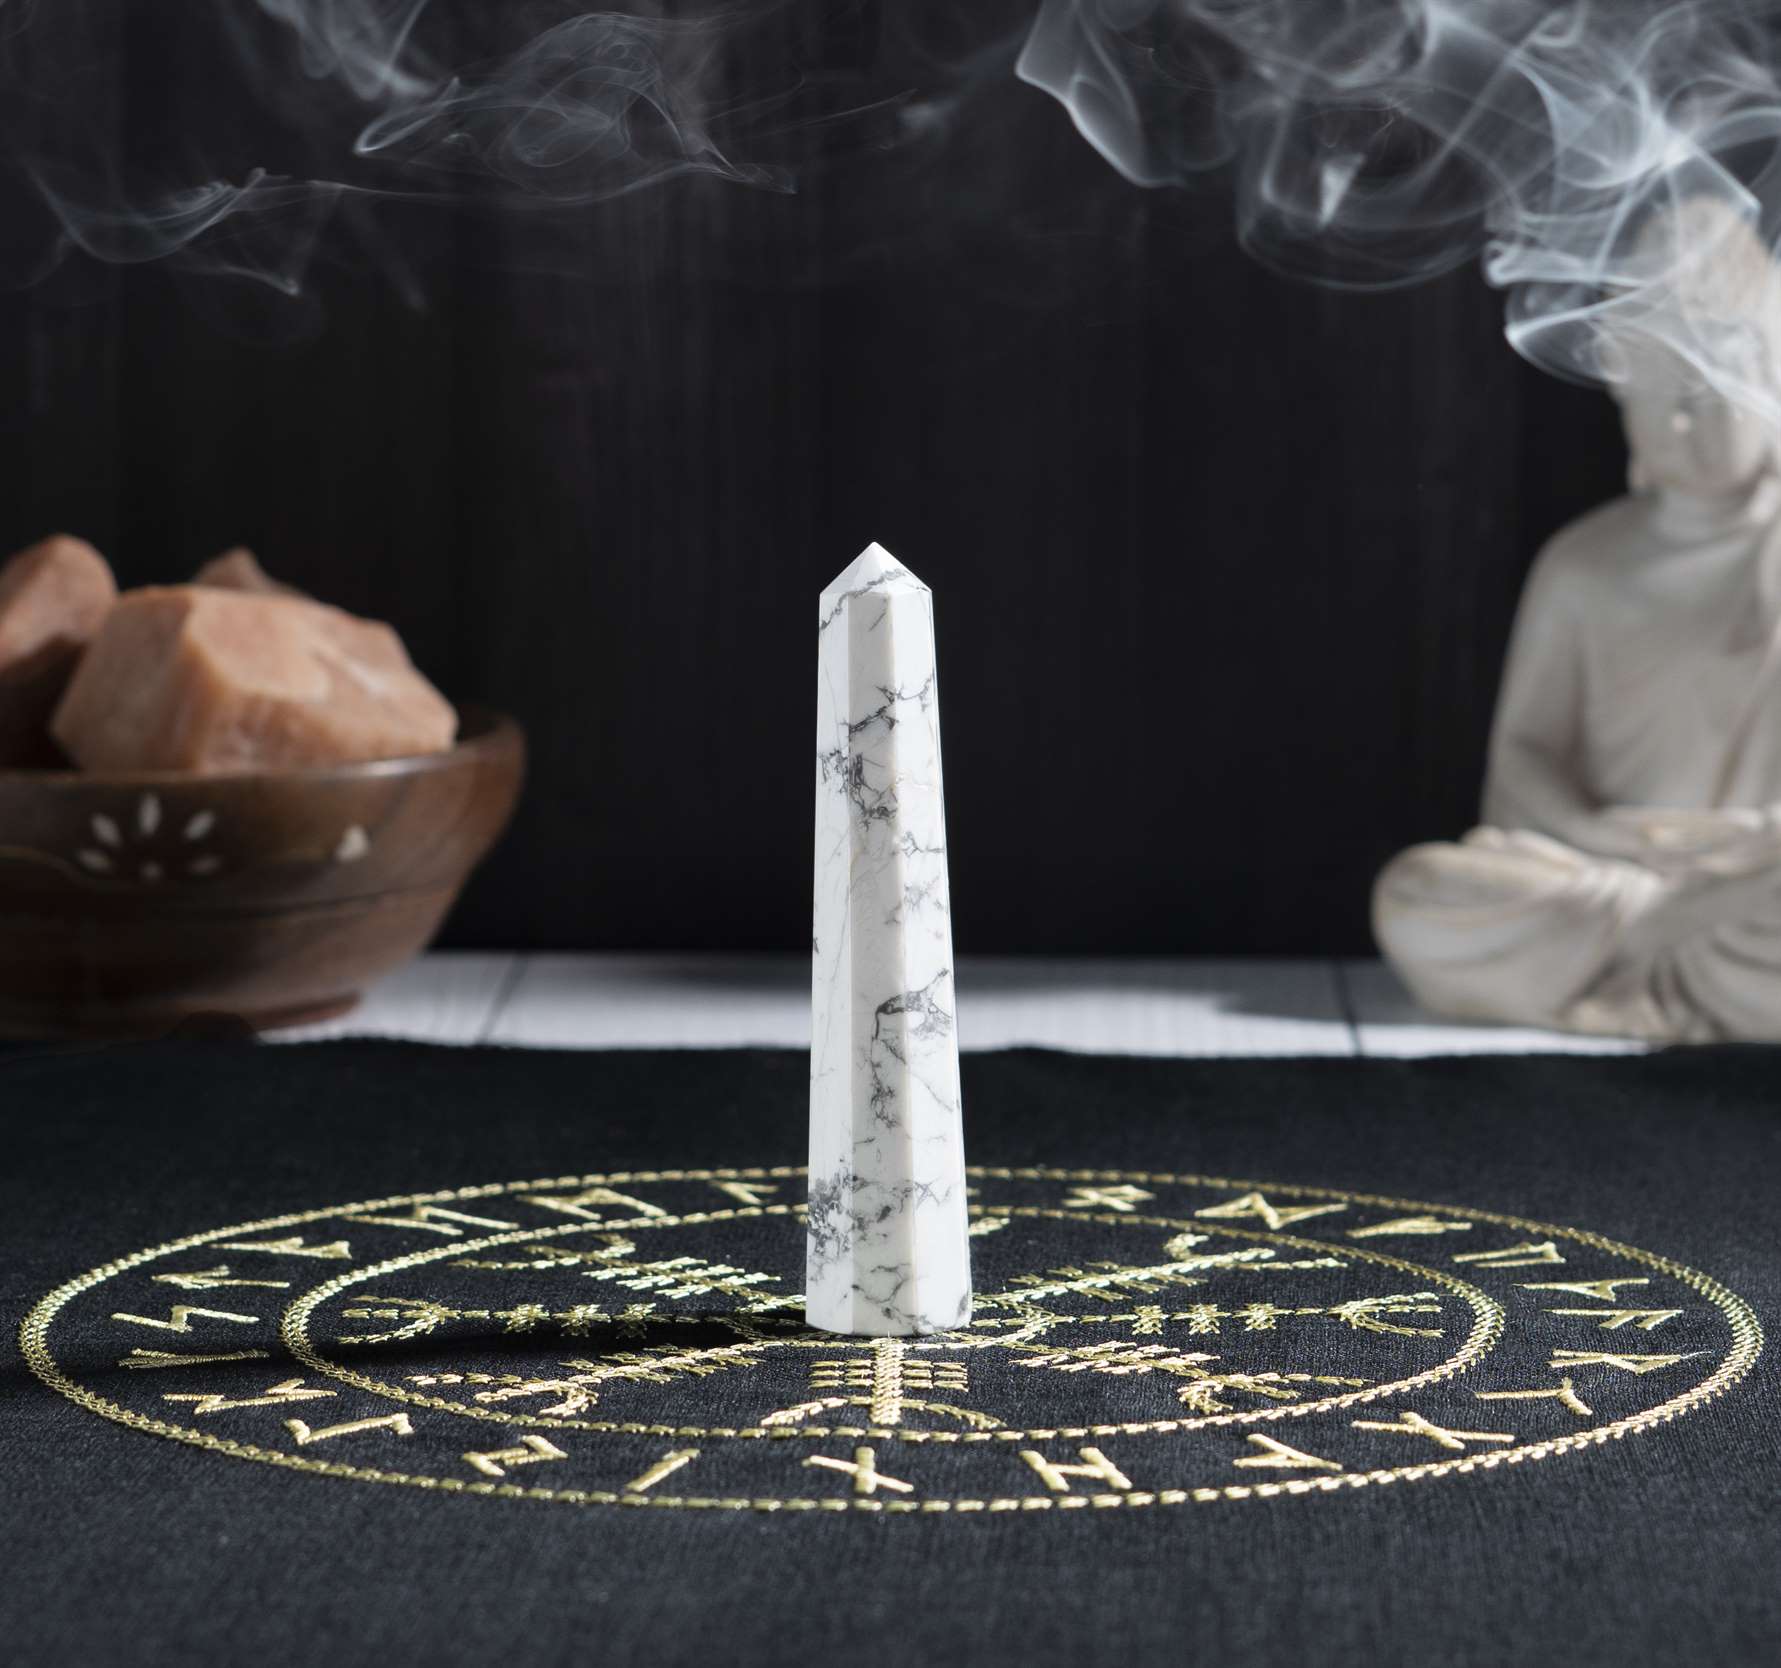 Howlite Healing Crystal Wand - For Manifestation, Massage, and Chakra Alignment - TheIndianHand